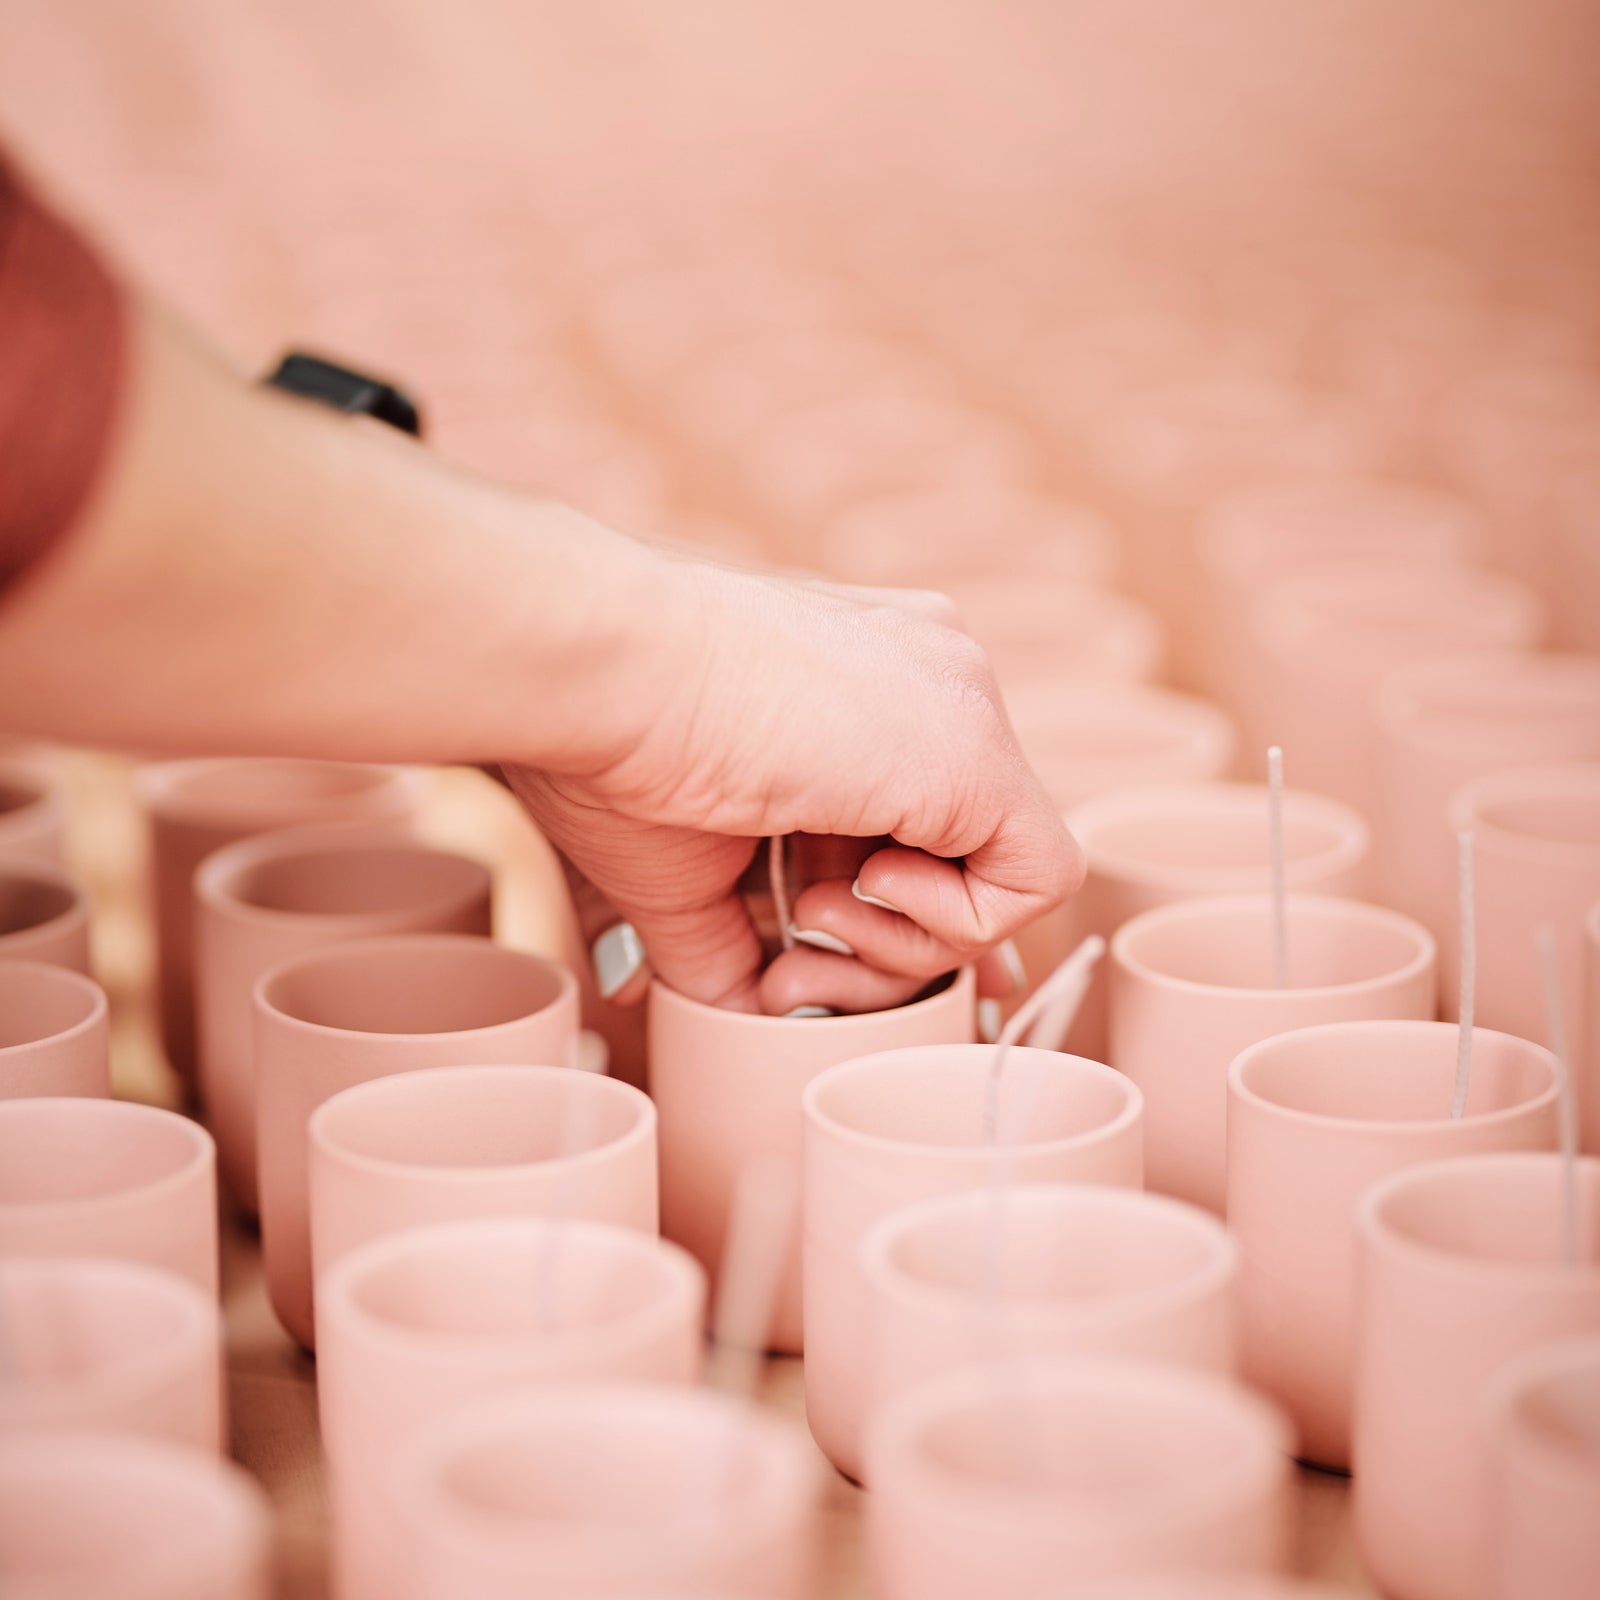 persons hand sticking wicks in candle vessels ready for candle making